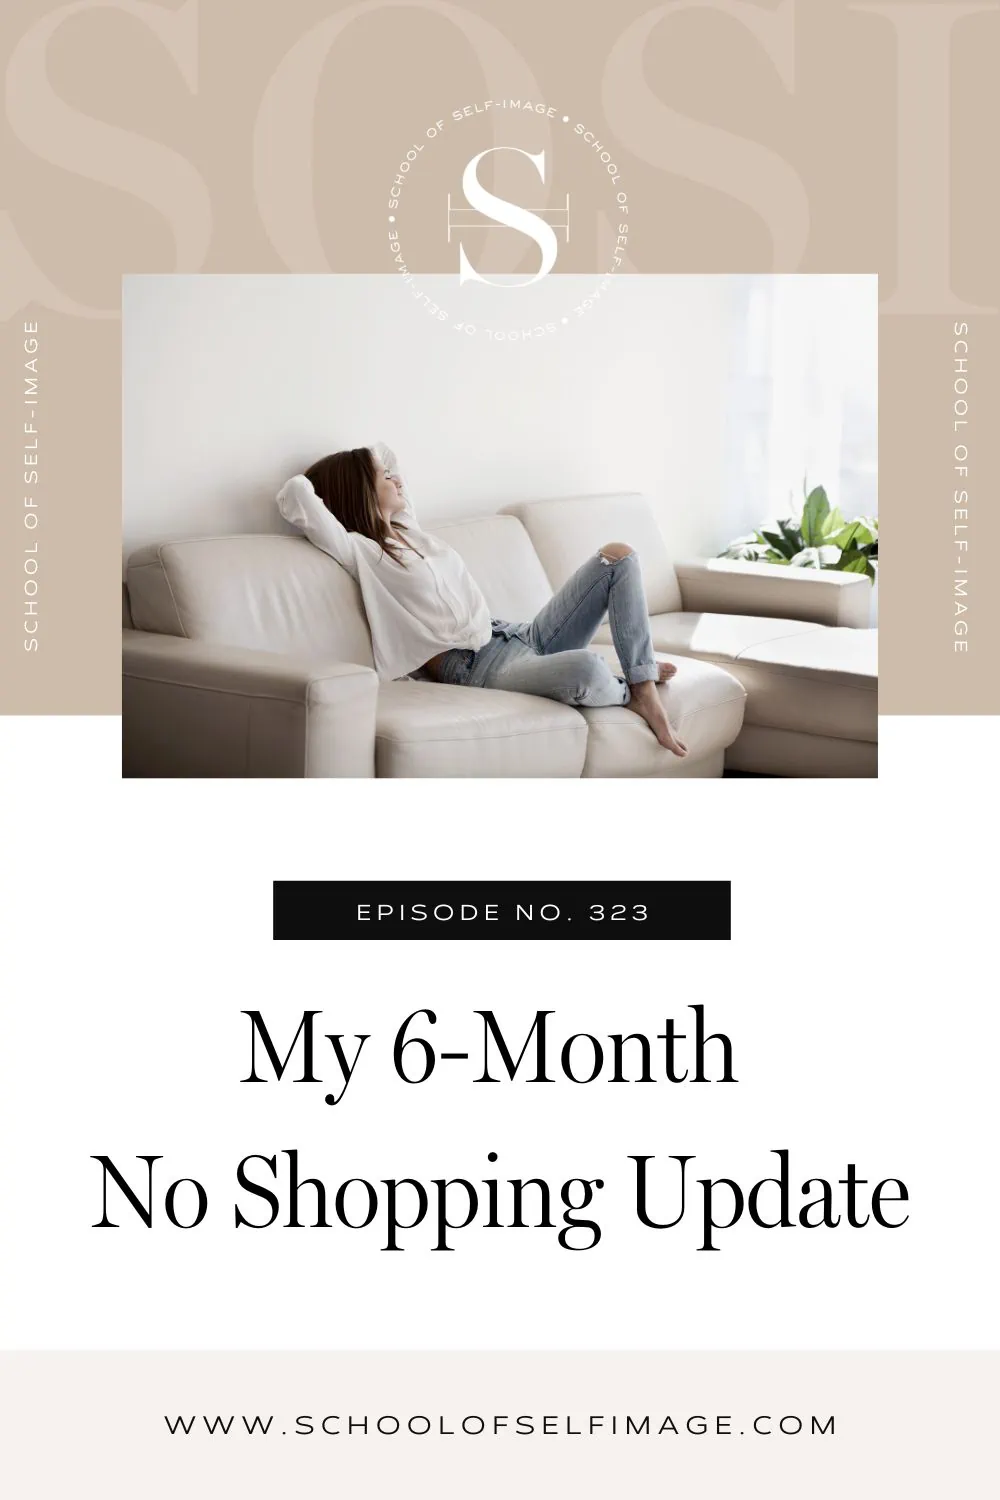 My 6-month No Shopping Update